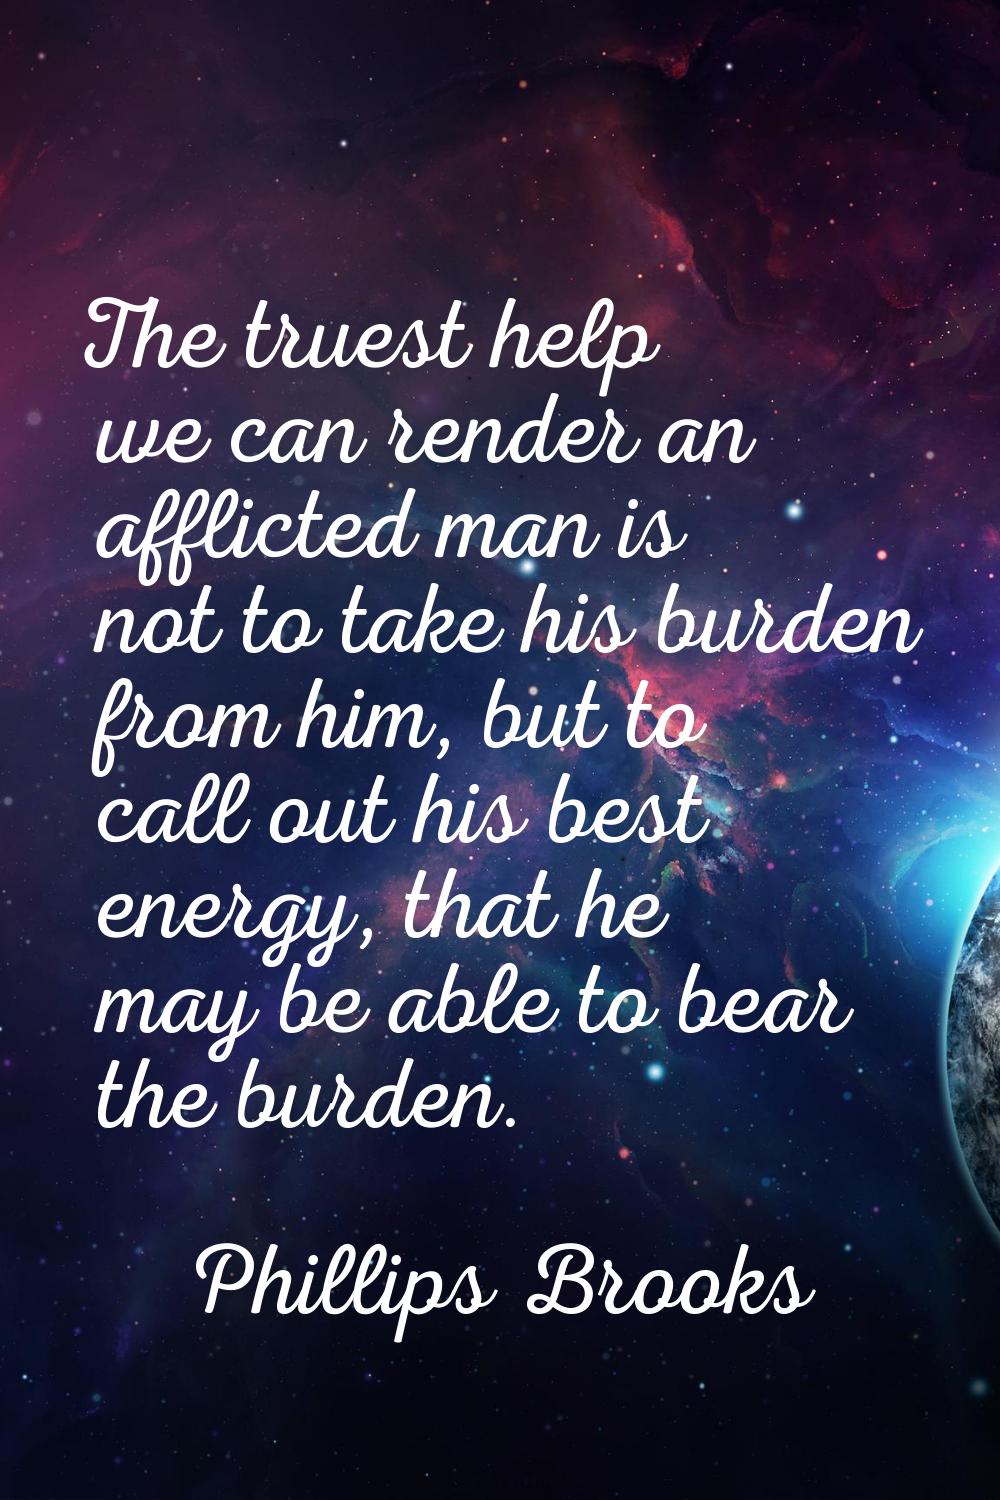 The truest help we can render an afflicted man is not to take his burden from him, but to call out 